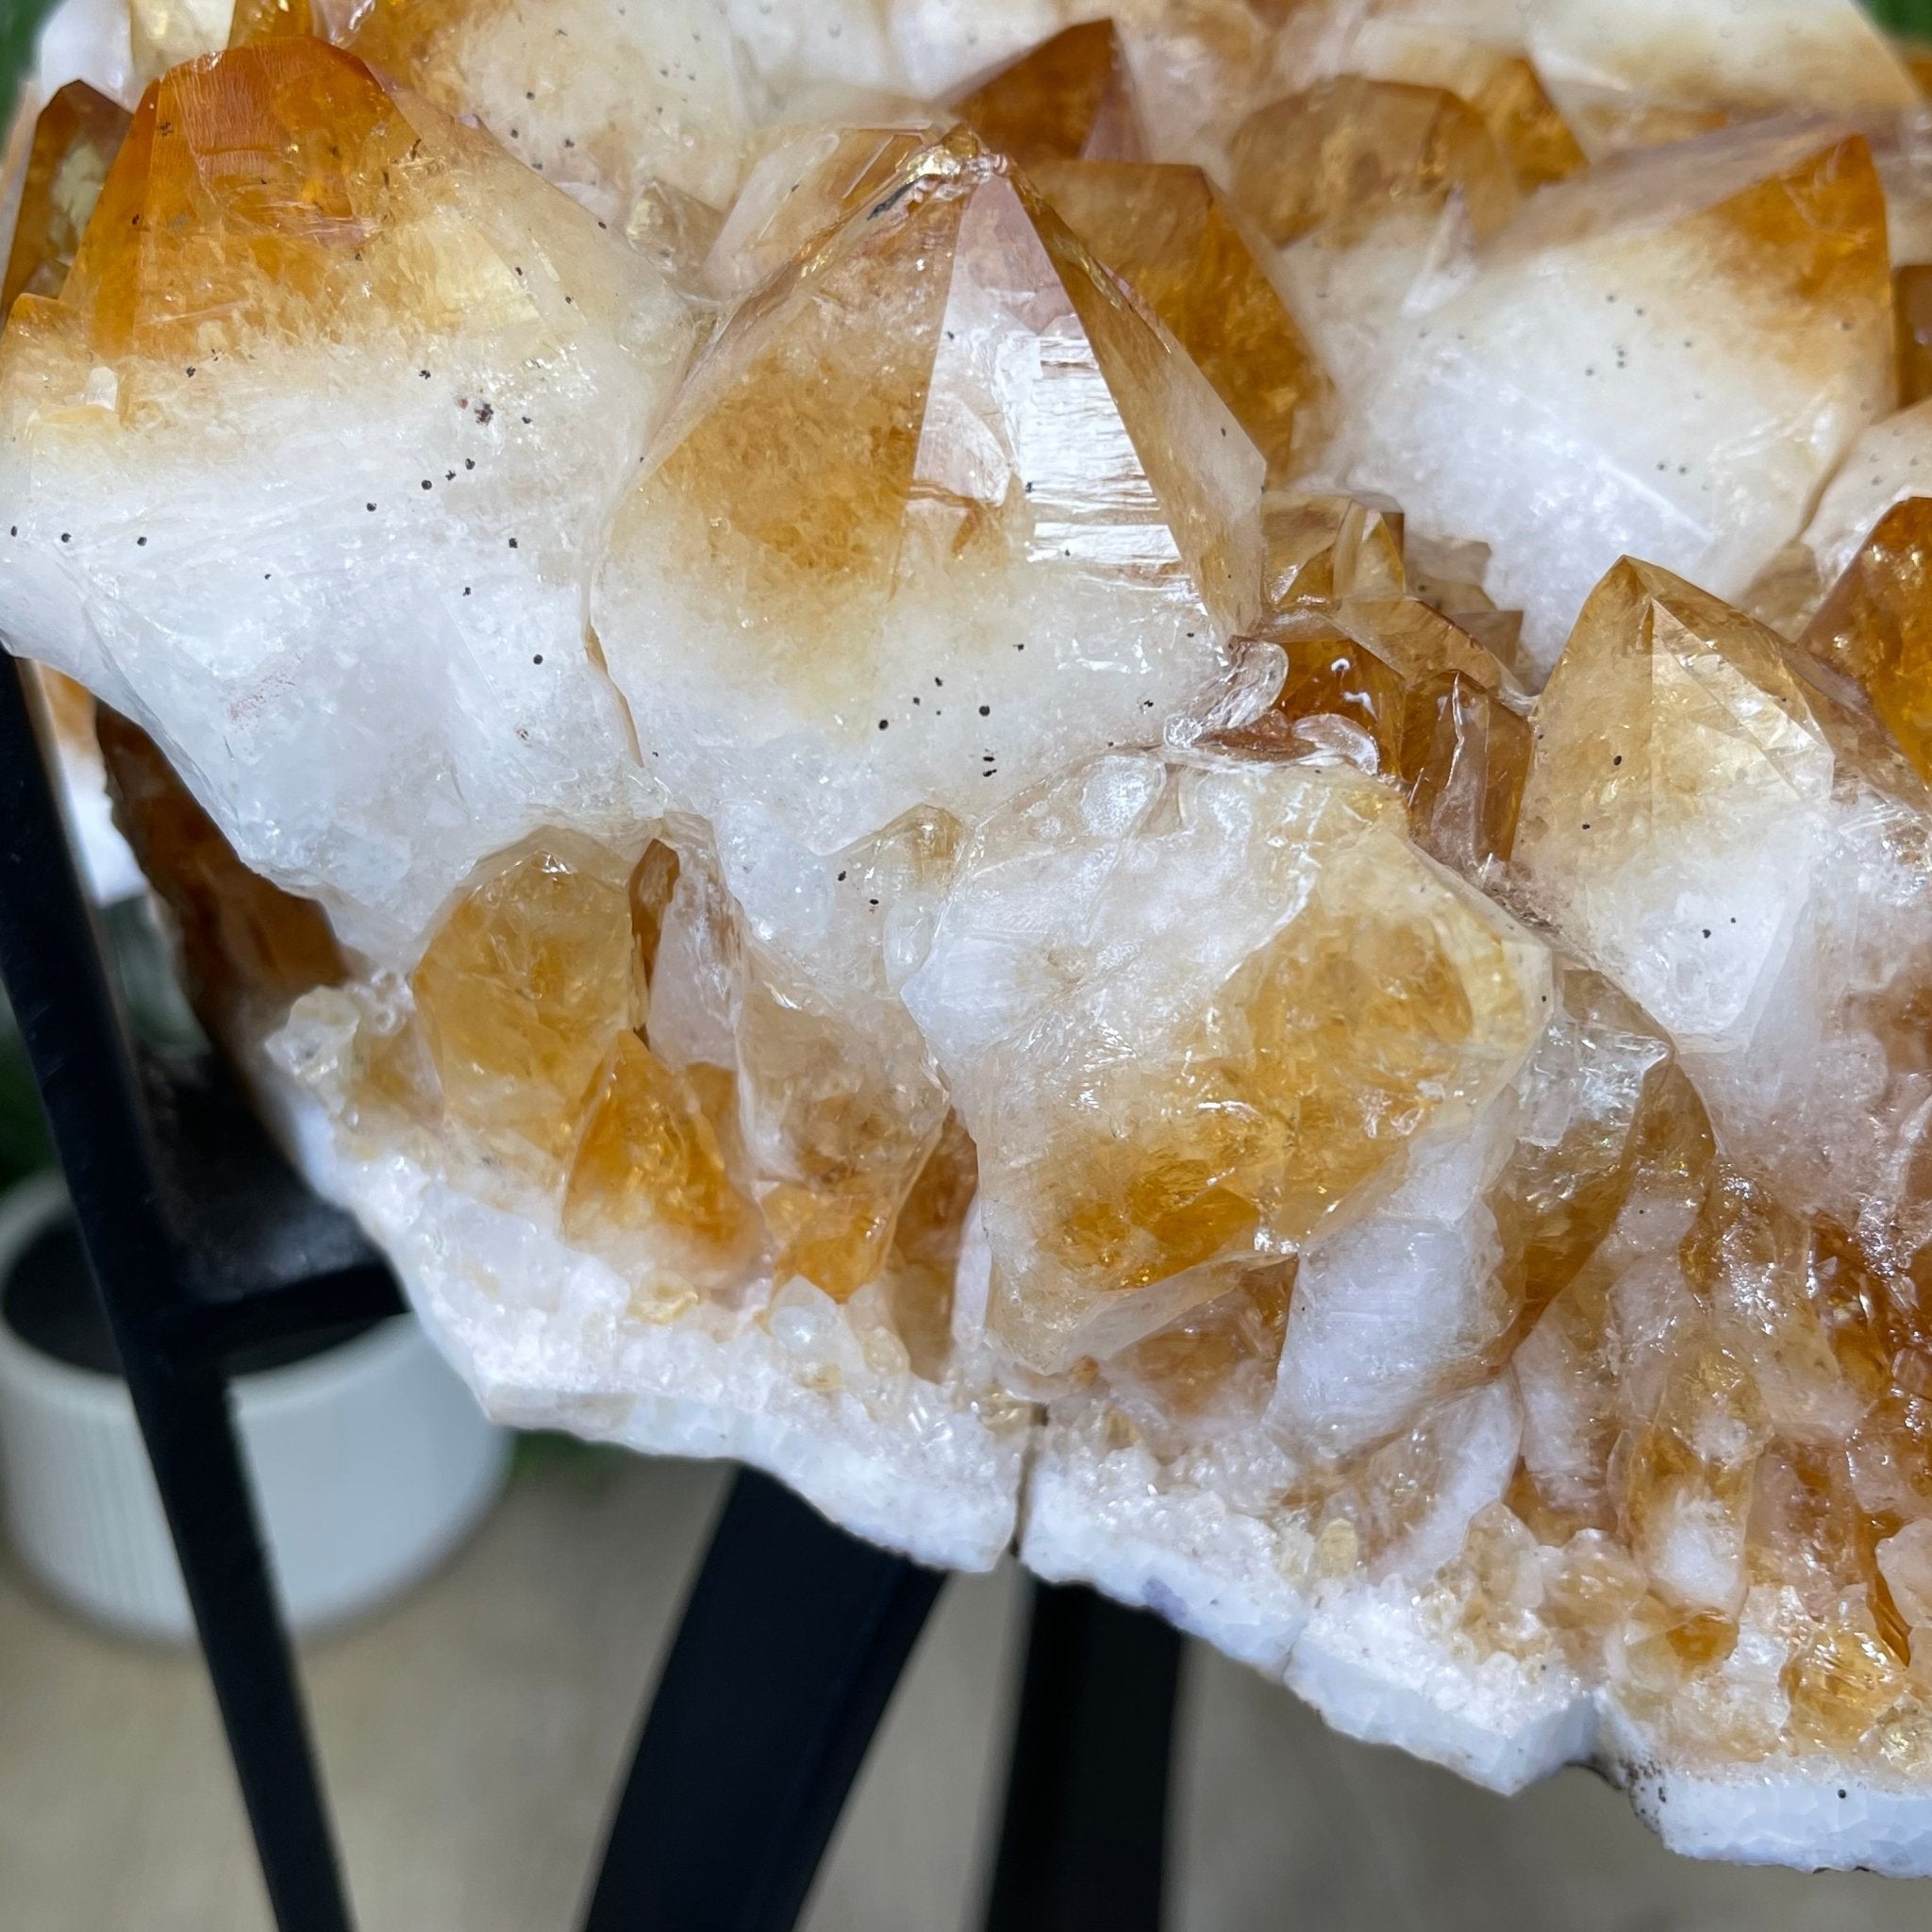 Extra Plus Quality Brazilian Citrine Geode Side Table, 48.5 lbs, 24" tall on a metal base #1392-0010 by Brazil Gems - Brazil GemsBrazil GemsExtra Plus Quality Brazilian Citrine Geode Side Table, 48.5 lbs, 24" tall on a metal base #1392-0010 by Brazil GemsTables: Side1392-0010